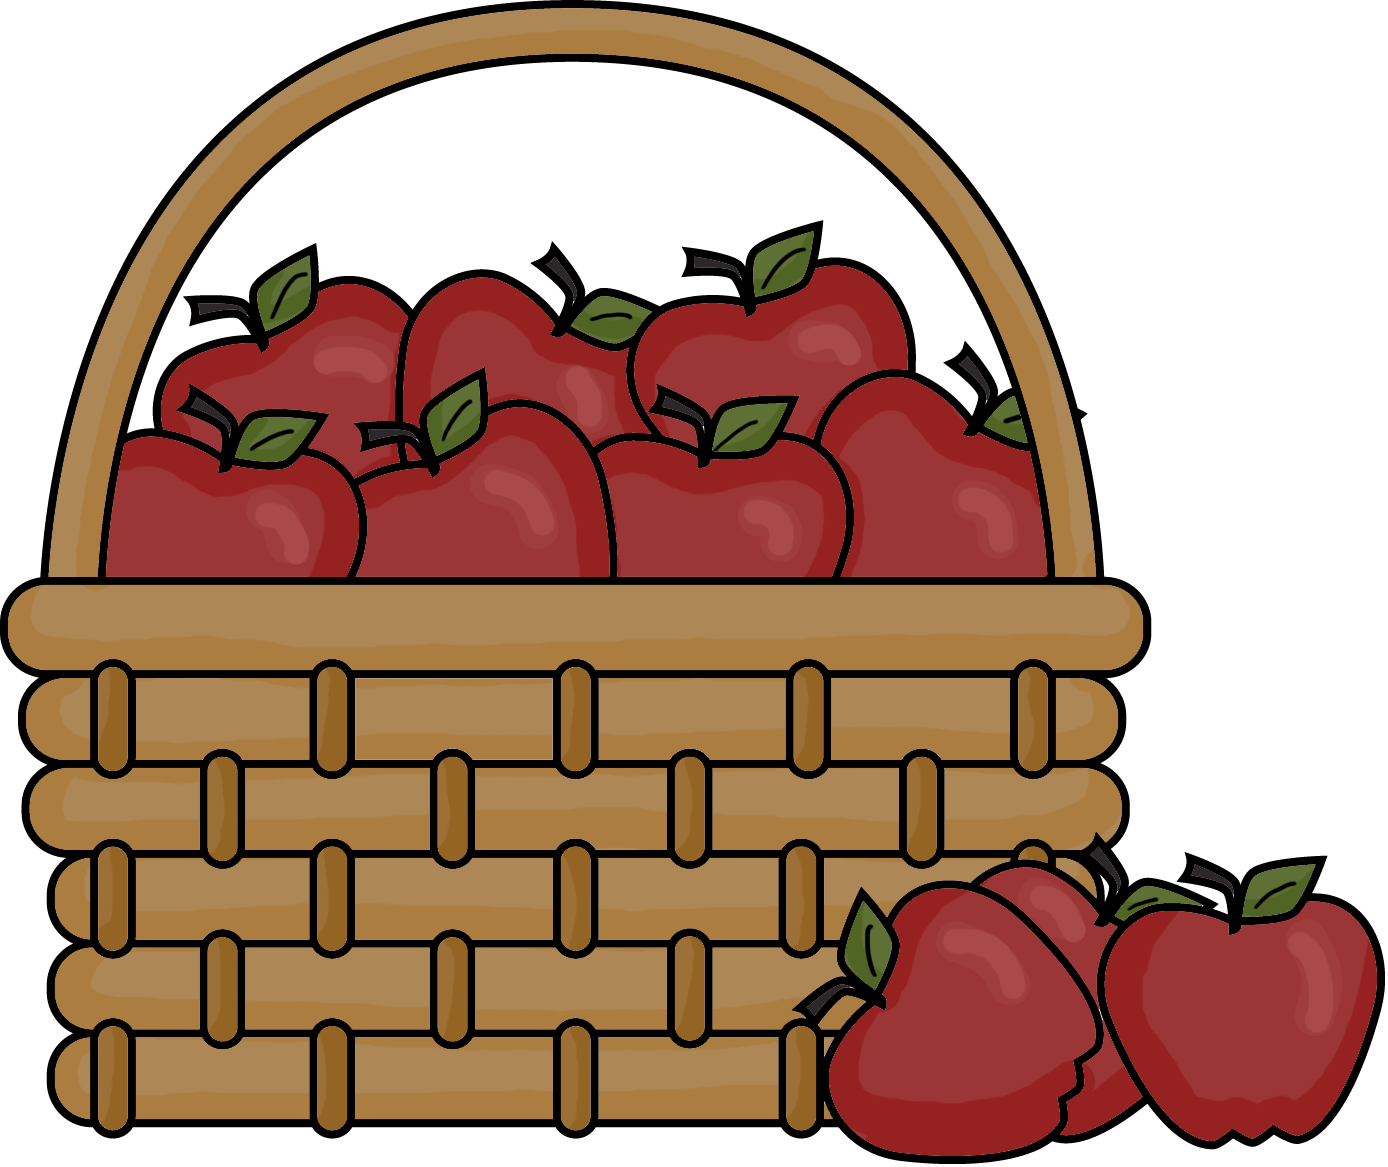 Coloring Cartoon Pictures Of Green Red Apples In A Basket ...